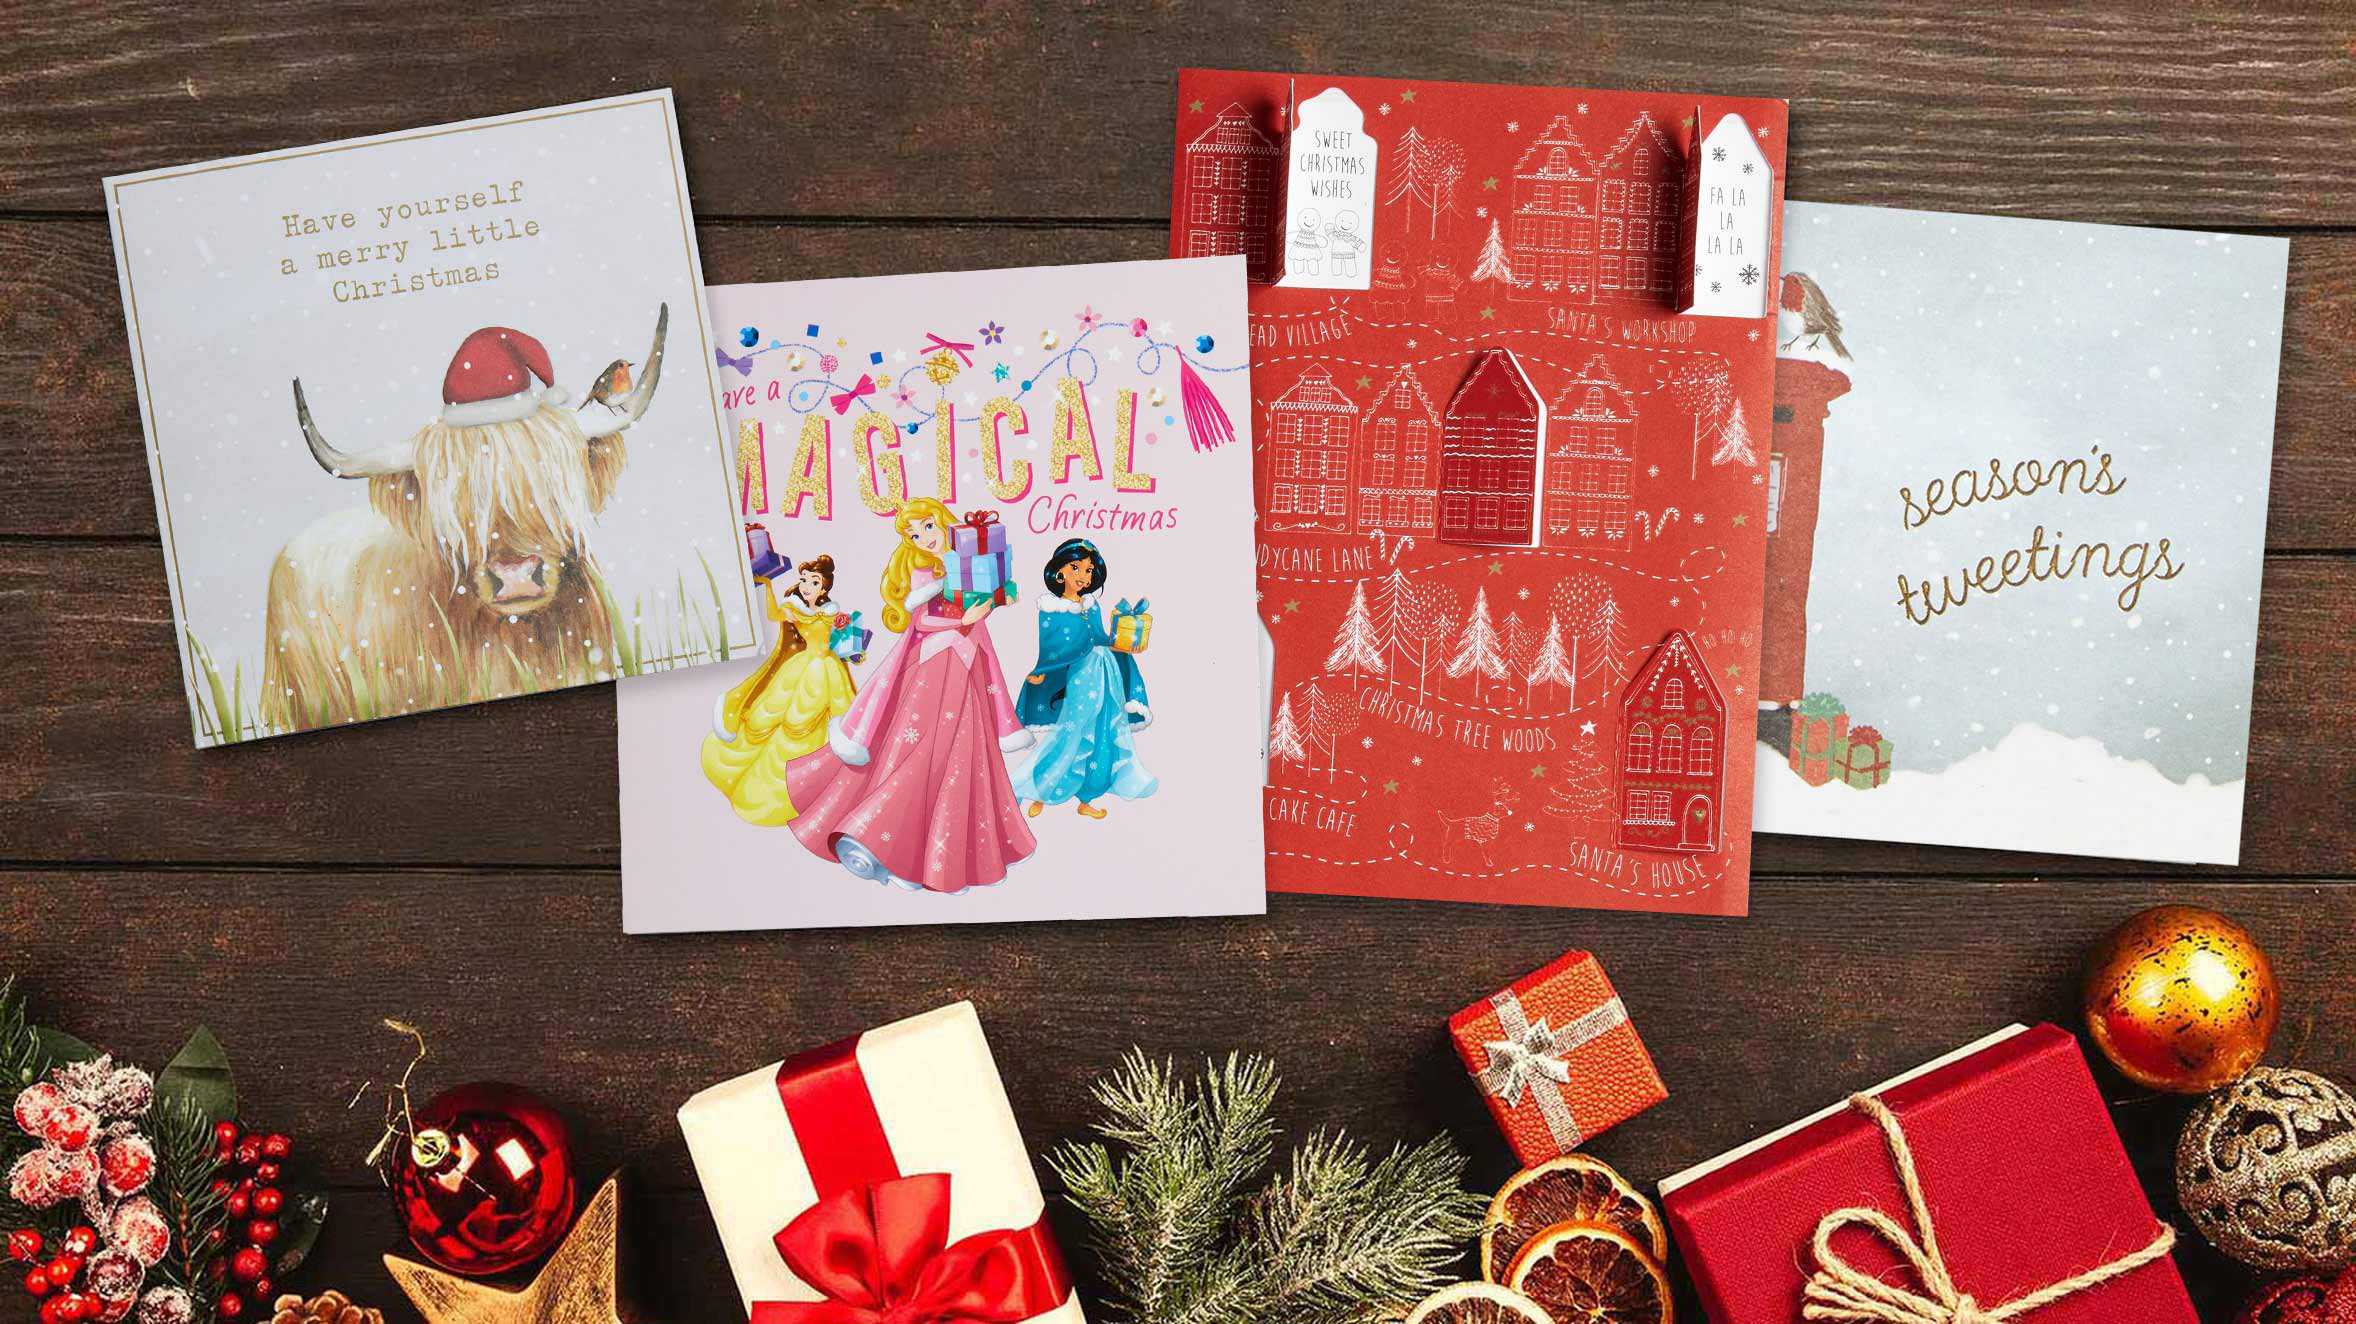 A selection of Next Retail's charity Christmas cards.